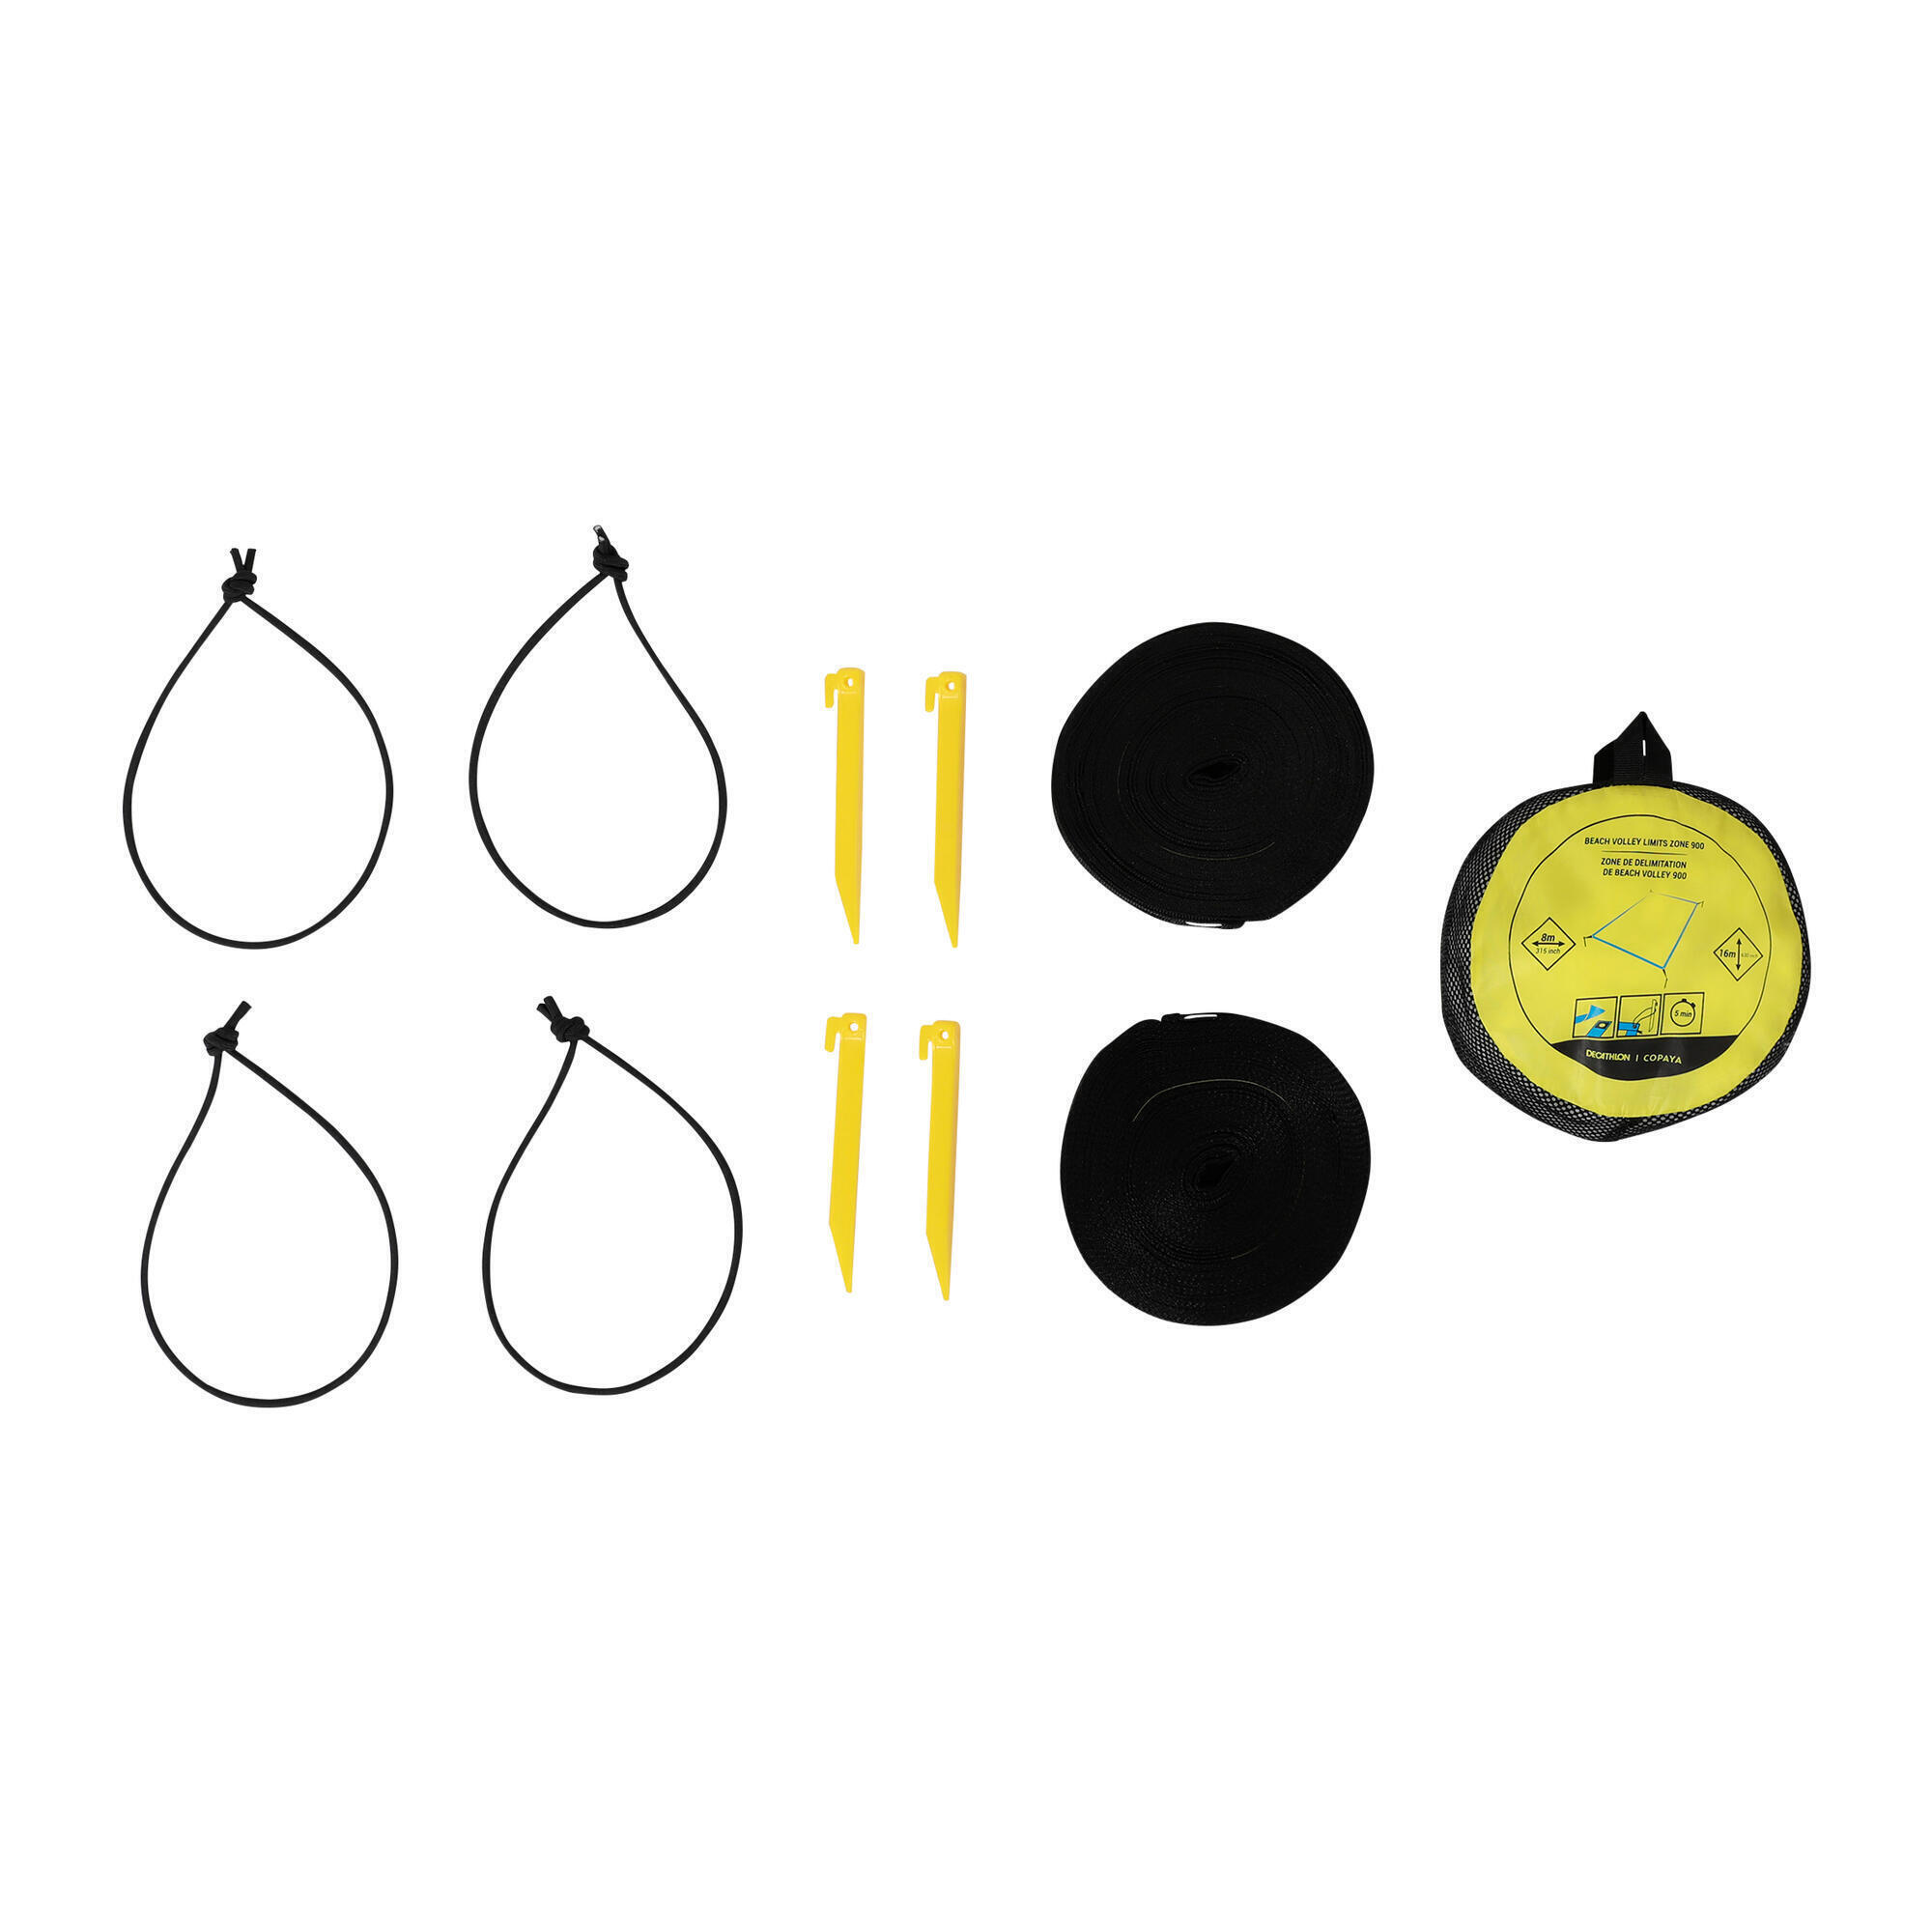 Beach Volleyball Markings BV900 - Official Dimensions (8mx16m) 2/6